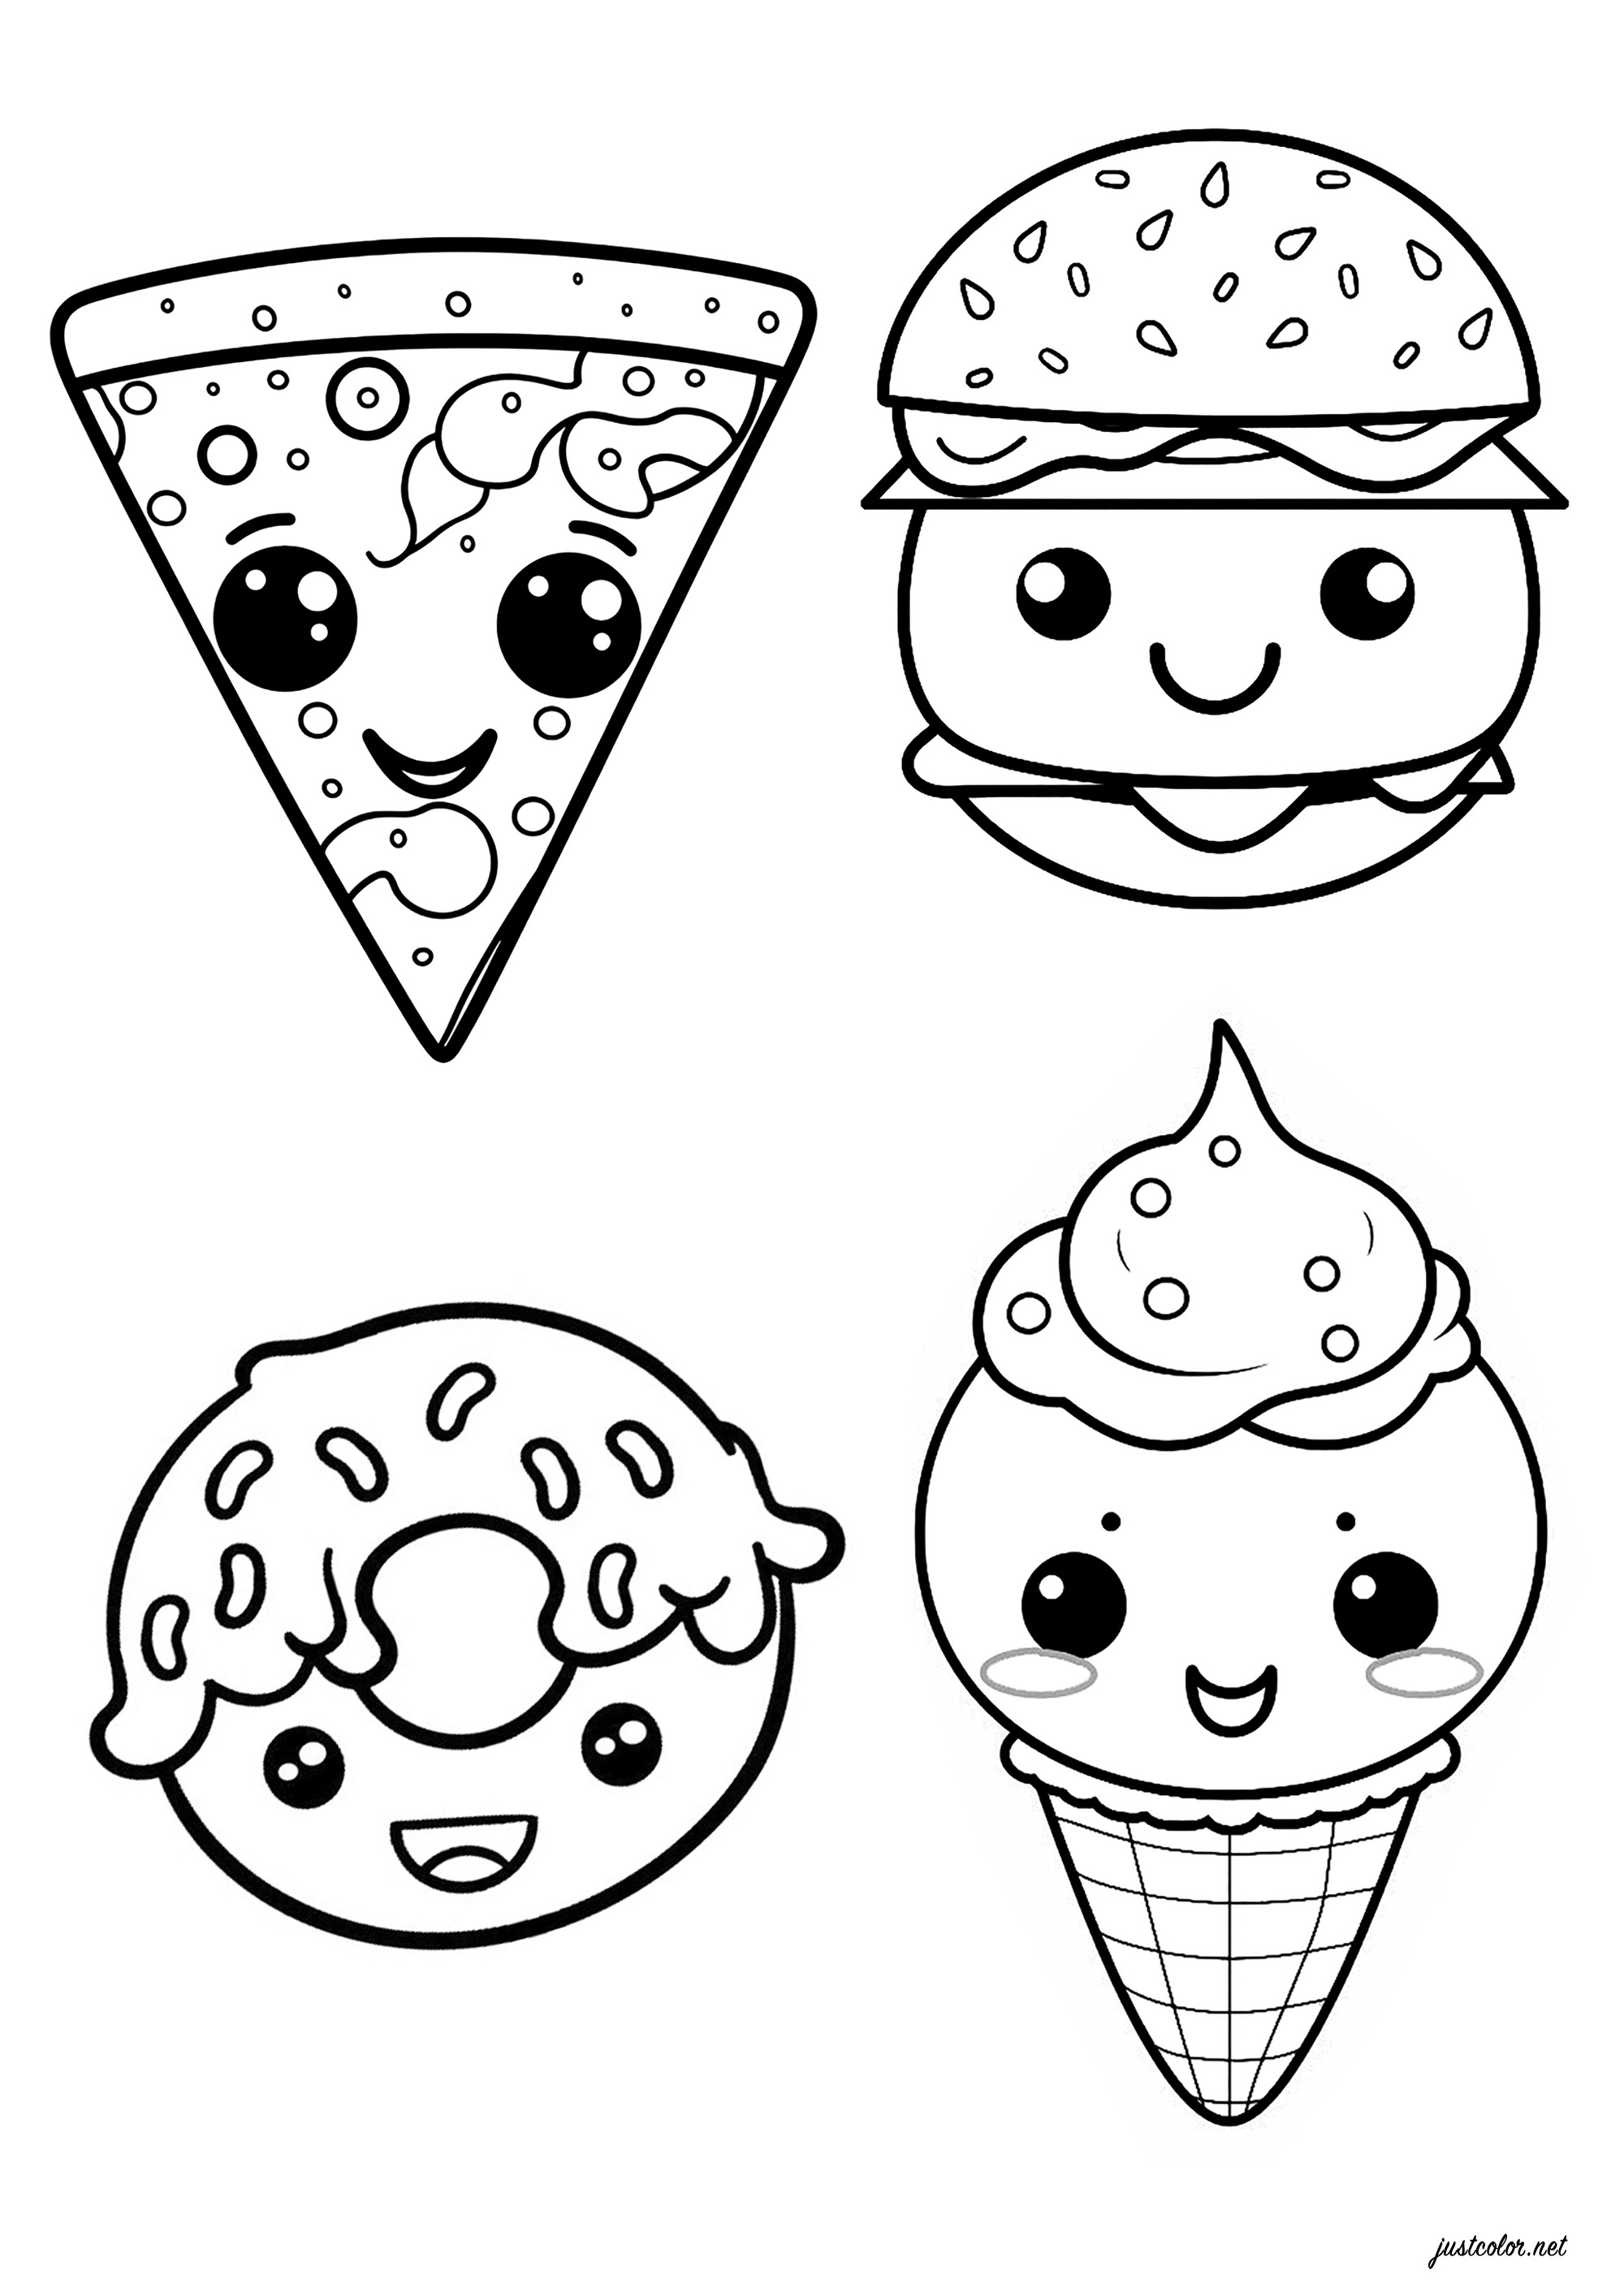 Color this adorable slice of pizza, this burger, this donut and this ice cream!. It's not a very balanced meal, but it's sure to be a lot of fun to color!